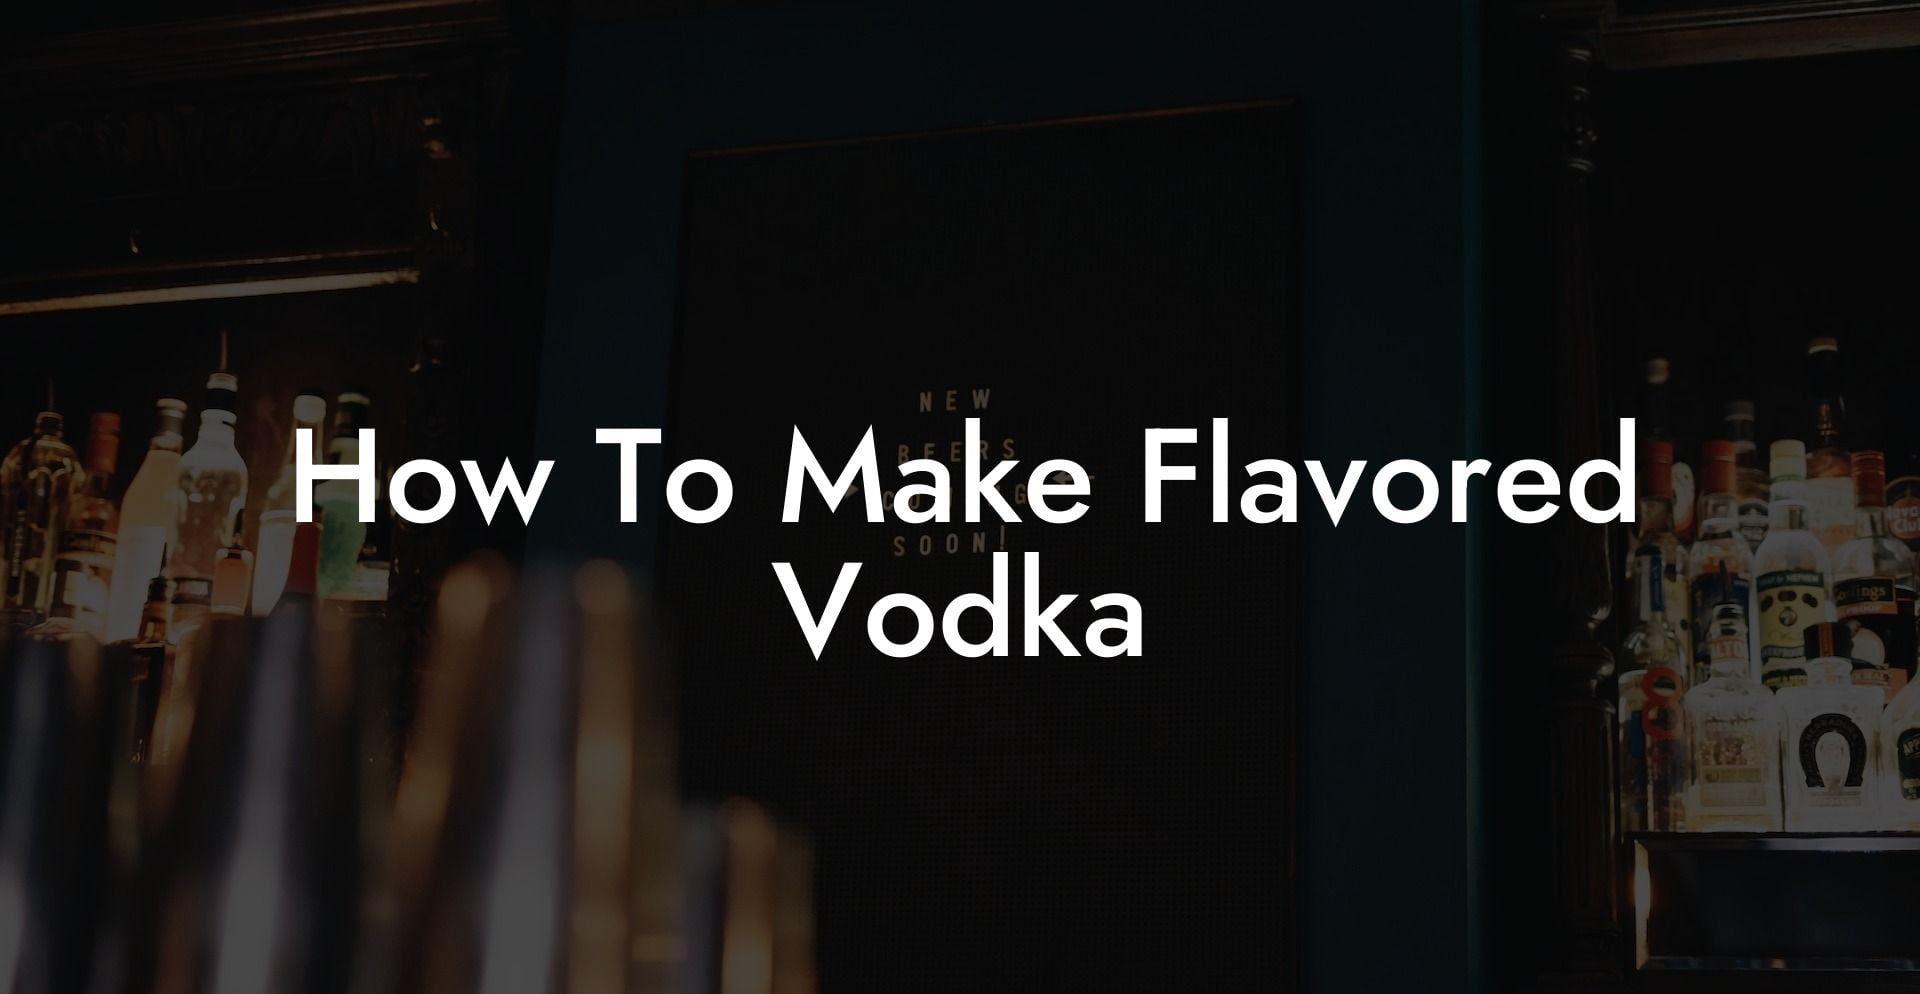 How To Make Flavored Vodka